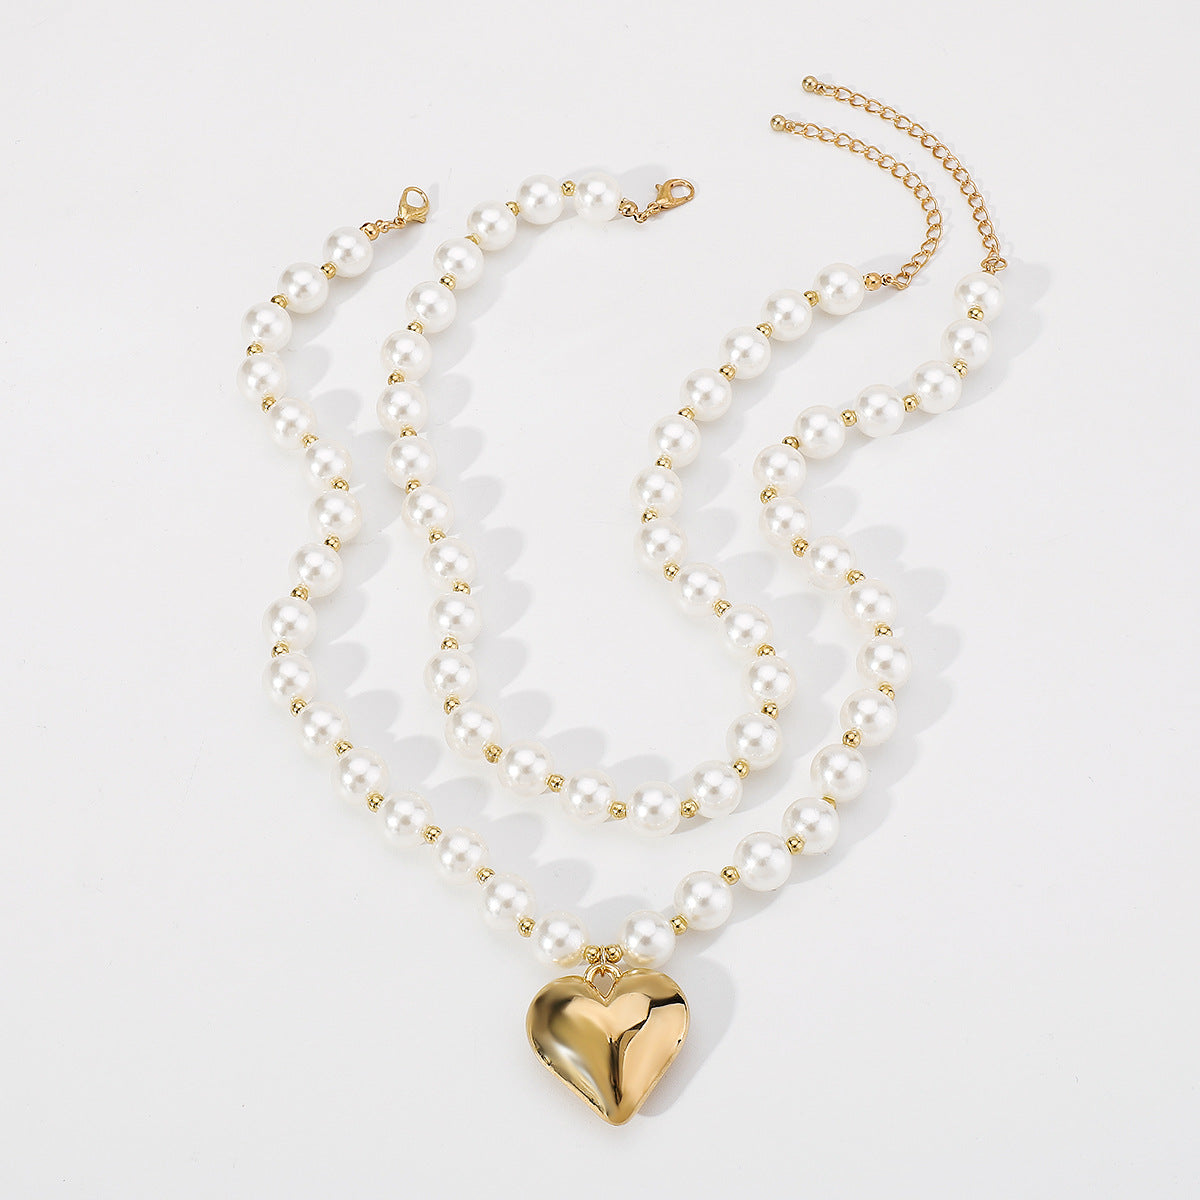 French romantic small fragrance double-layered pearl three-dimensional love necklace